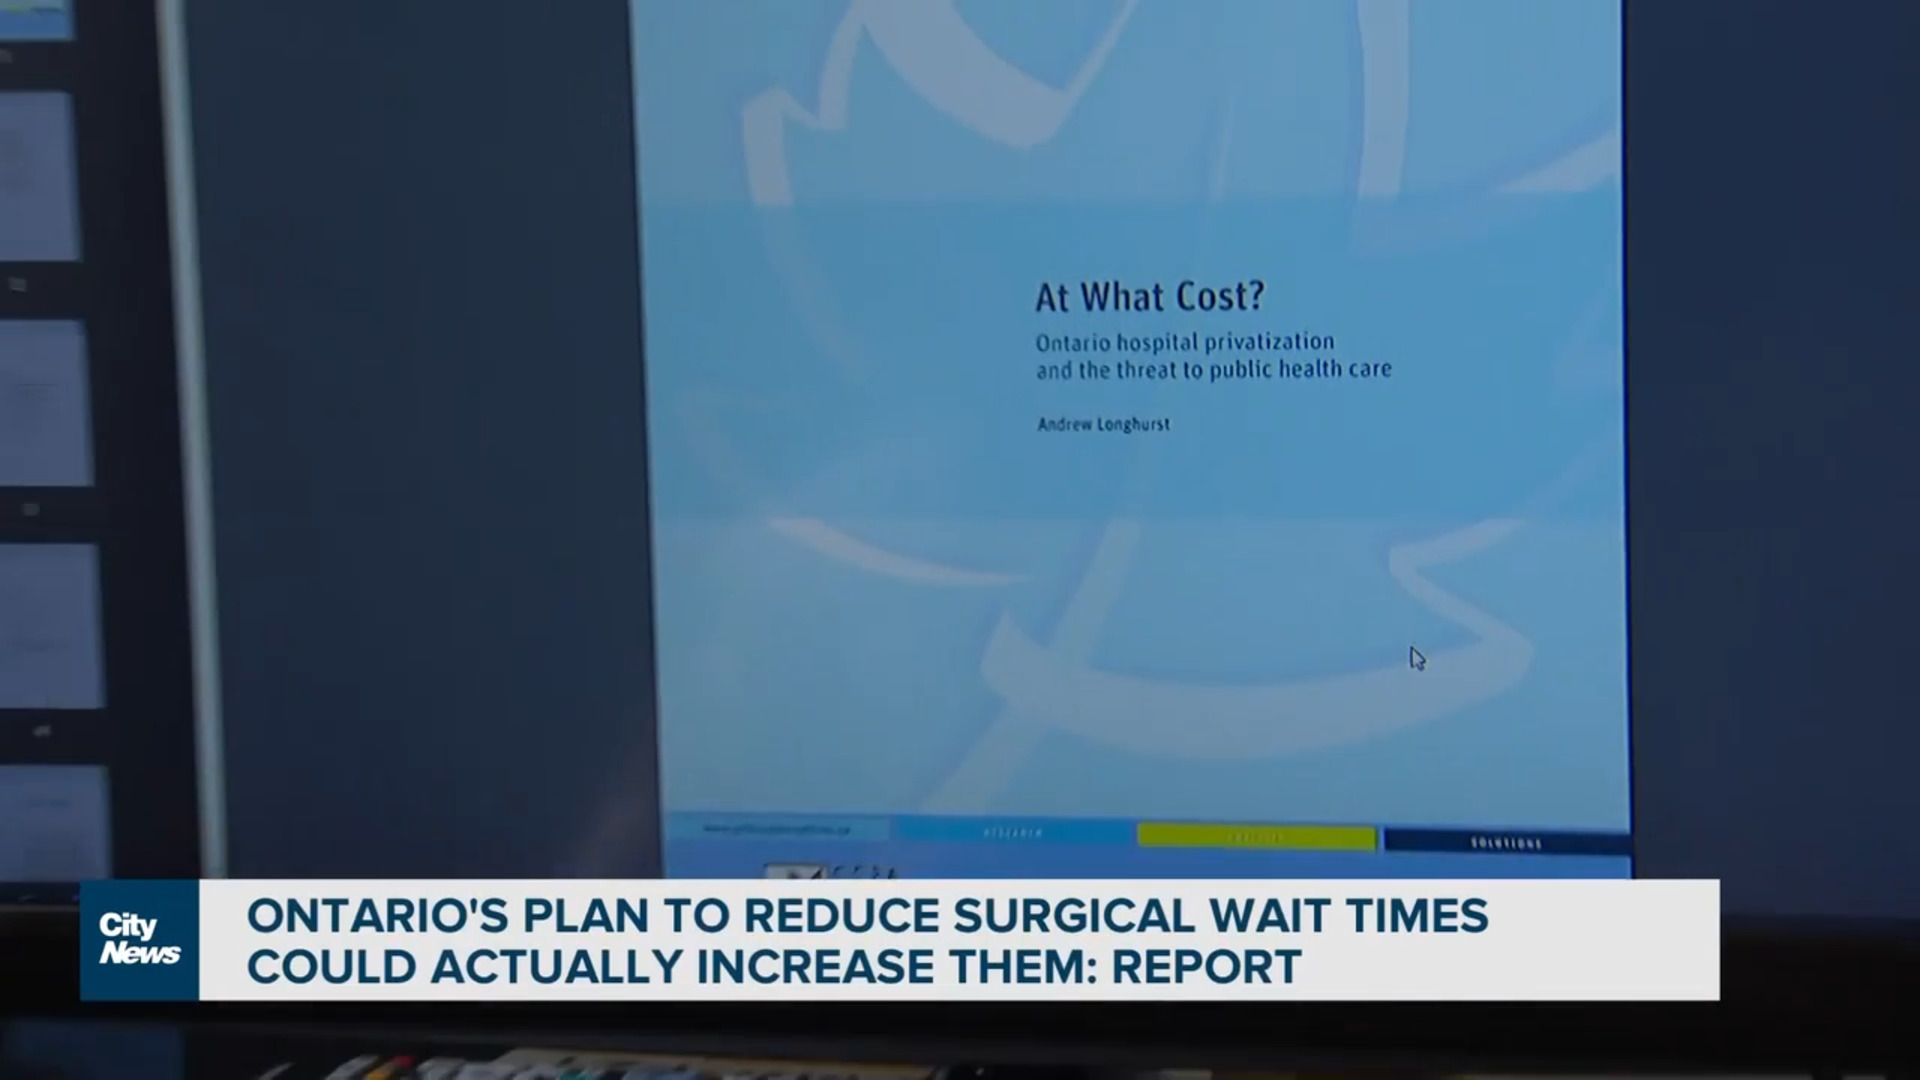 Ford government's Bill 60 will increase surgical wait times: report